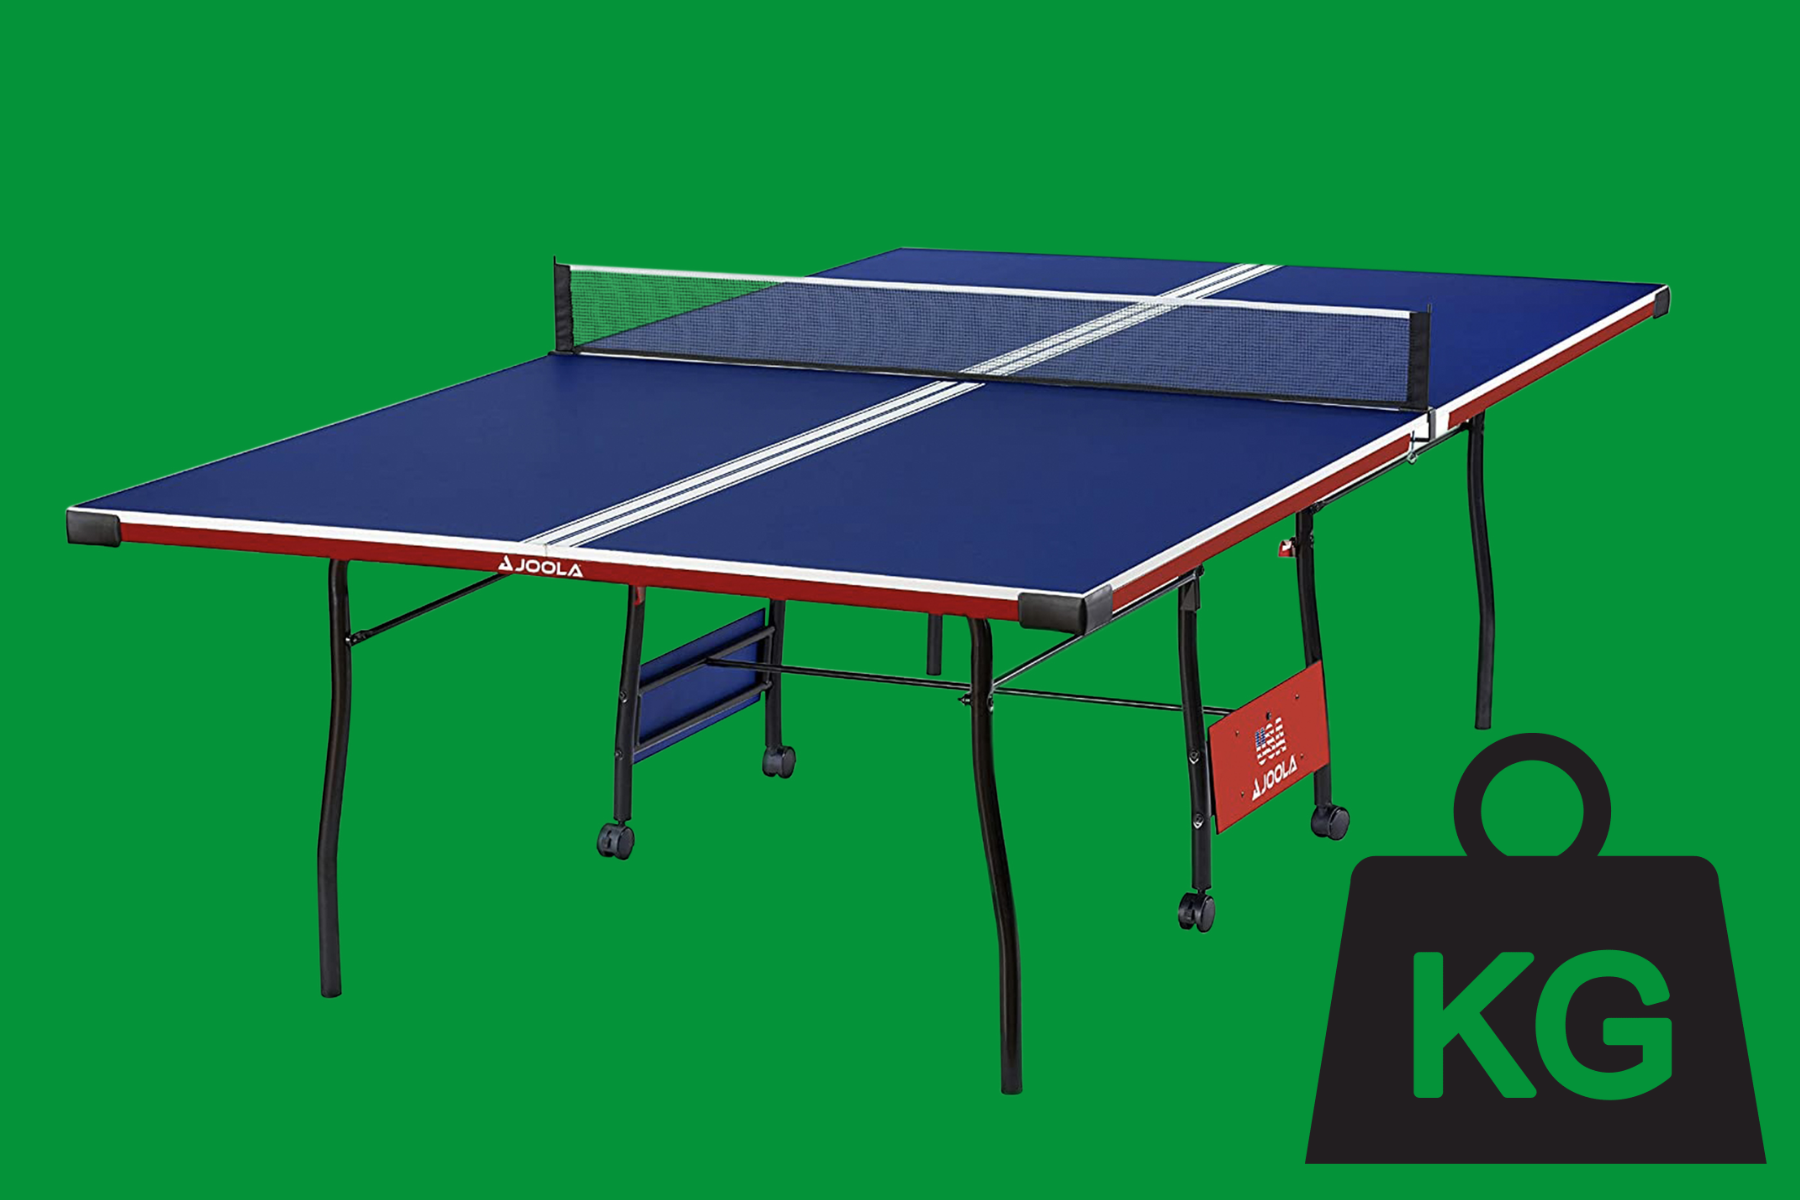 A ping-pong table in blue on a green background, next to a KG weight